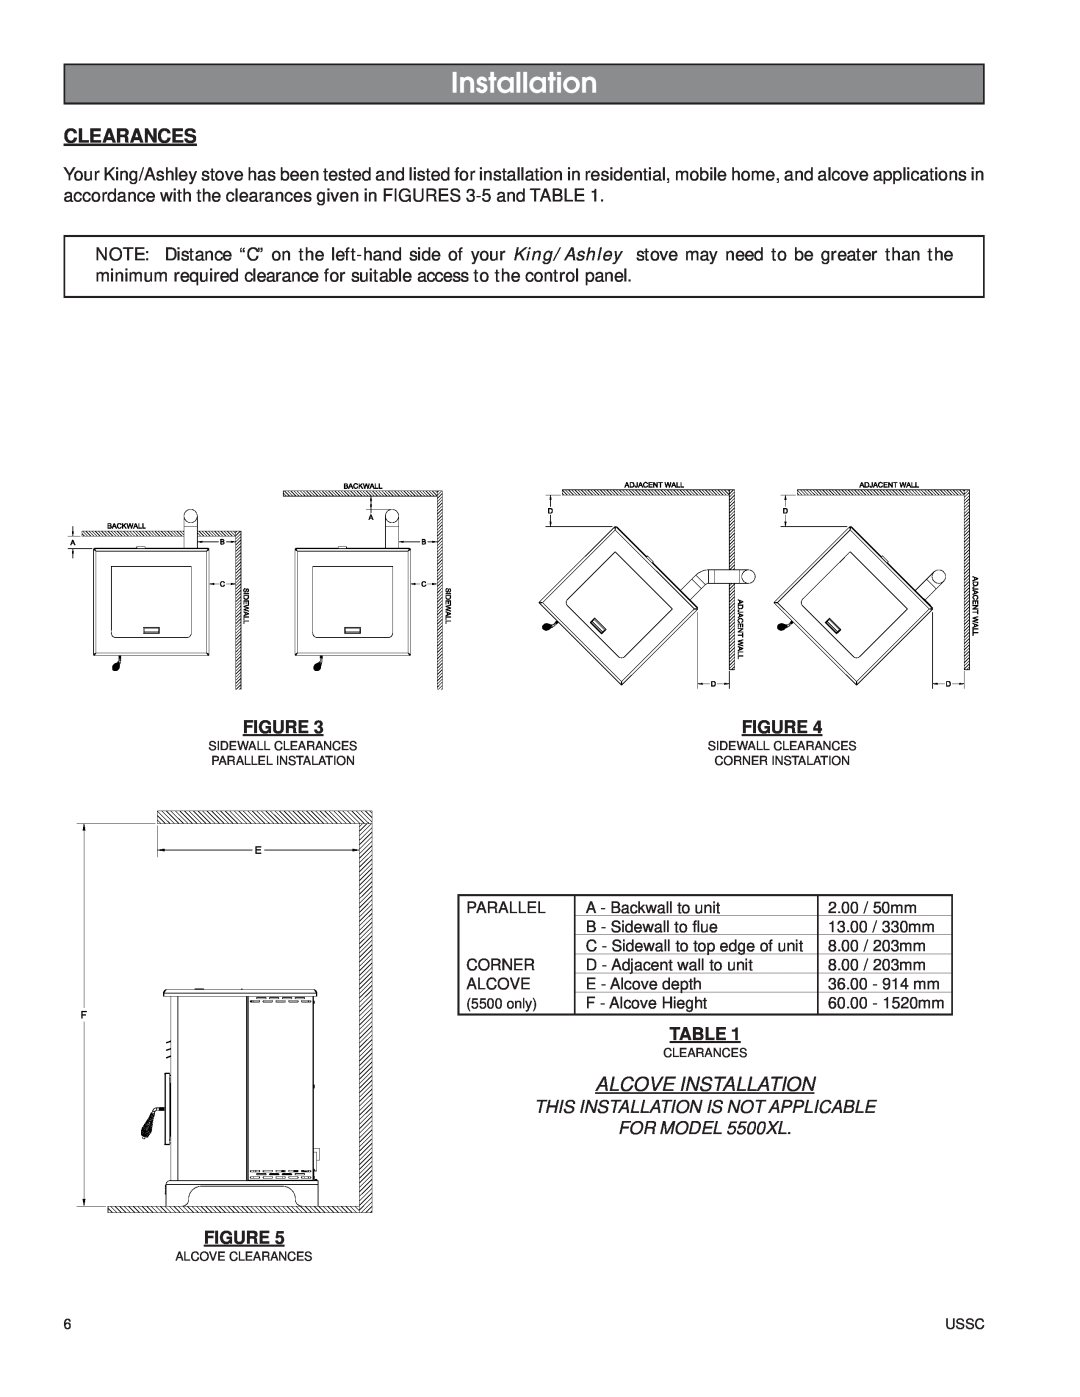 United States Stove Clearances, Alcove Installation, This Installation Is Not Applicable, FOR MODEL 5500XL 